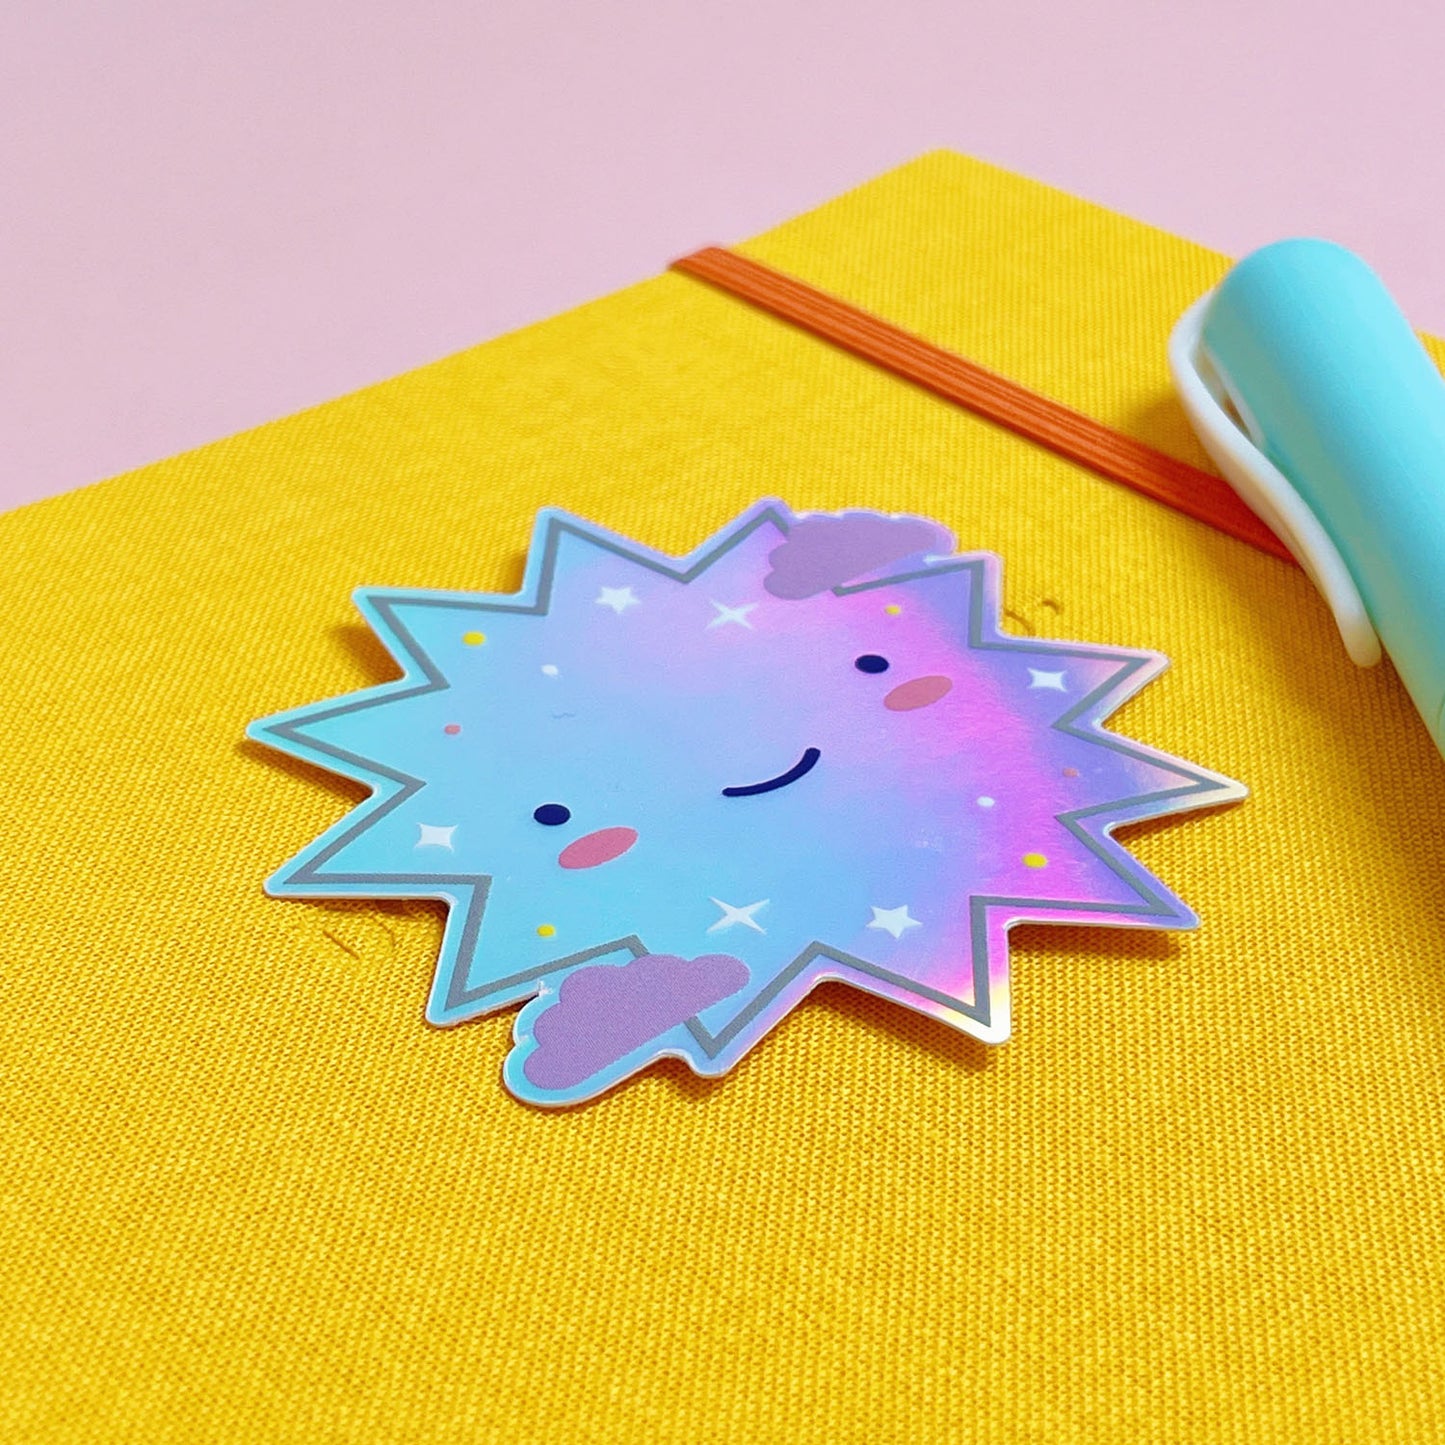 A shiny iridescent holographic vinyl sticker featuring a smiling starburst lying on top of a yellow journal on a pink background